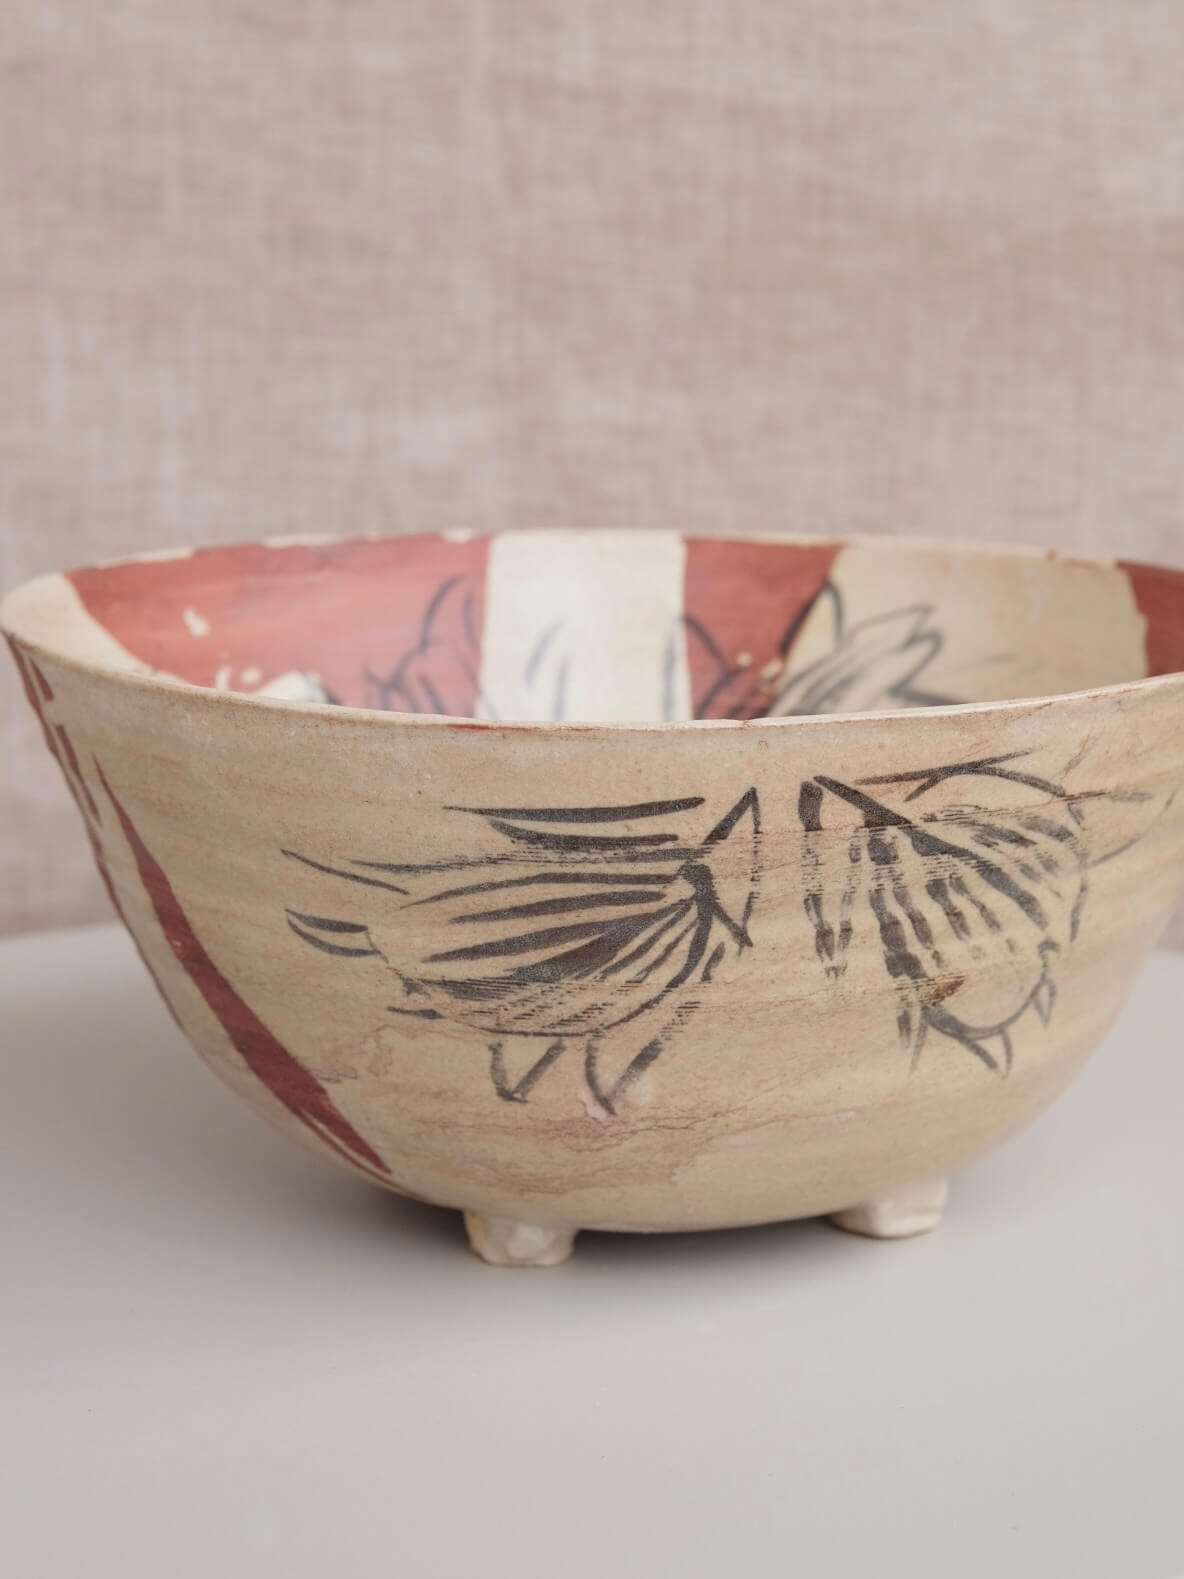 Footed Bowl with Flowers and Terra Cotta Glaze